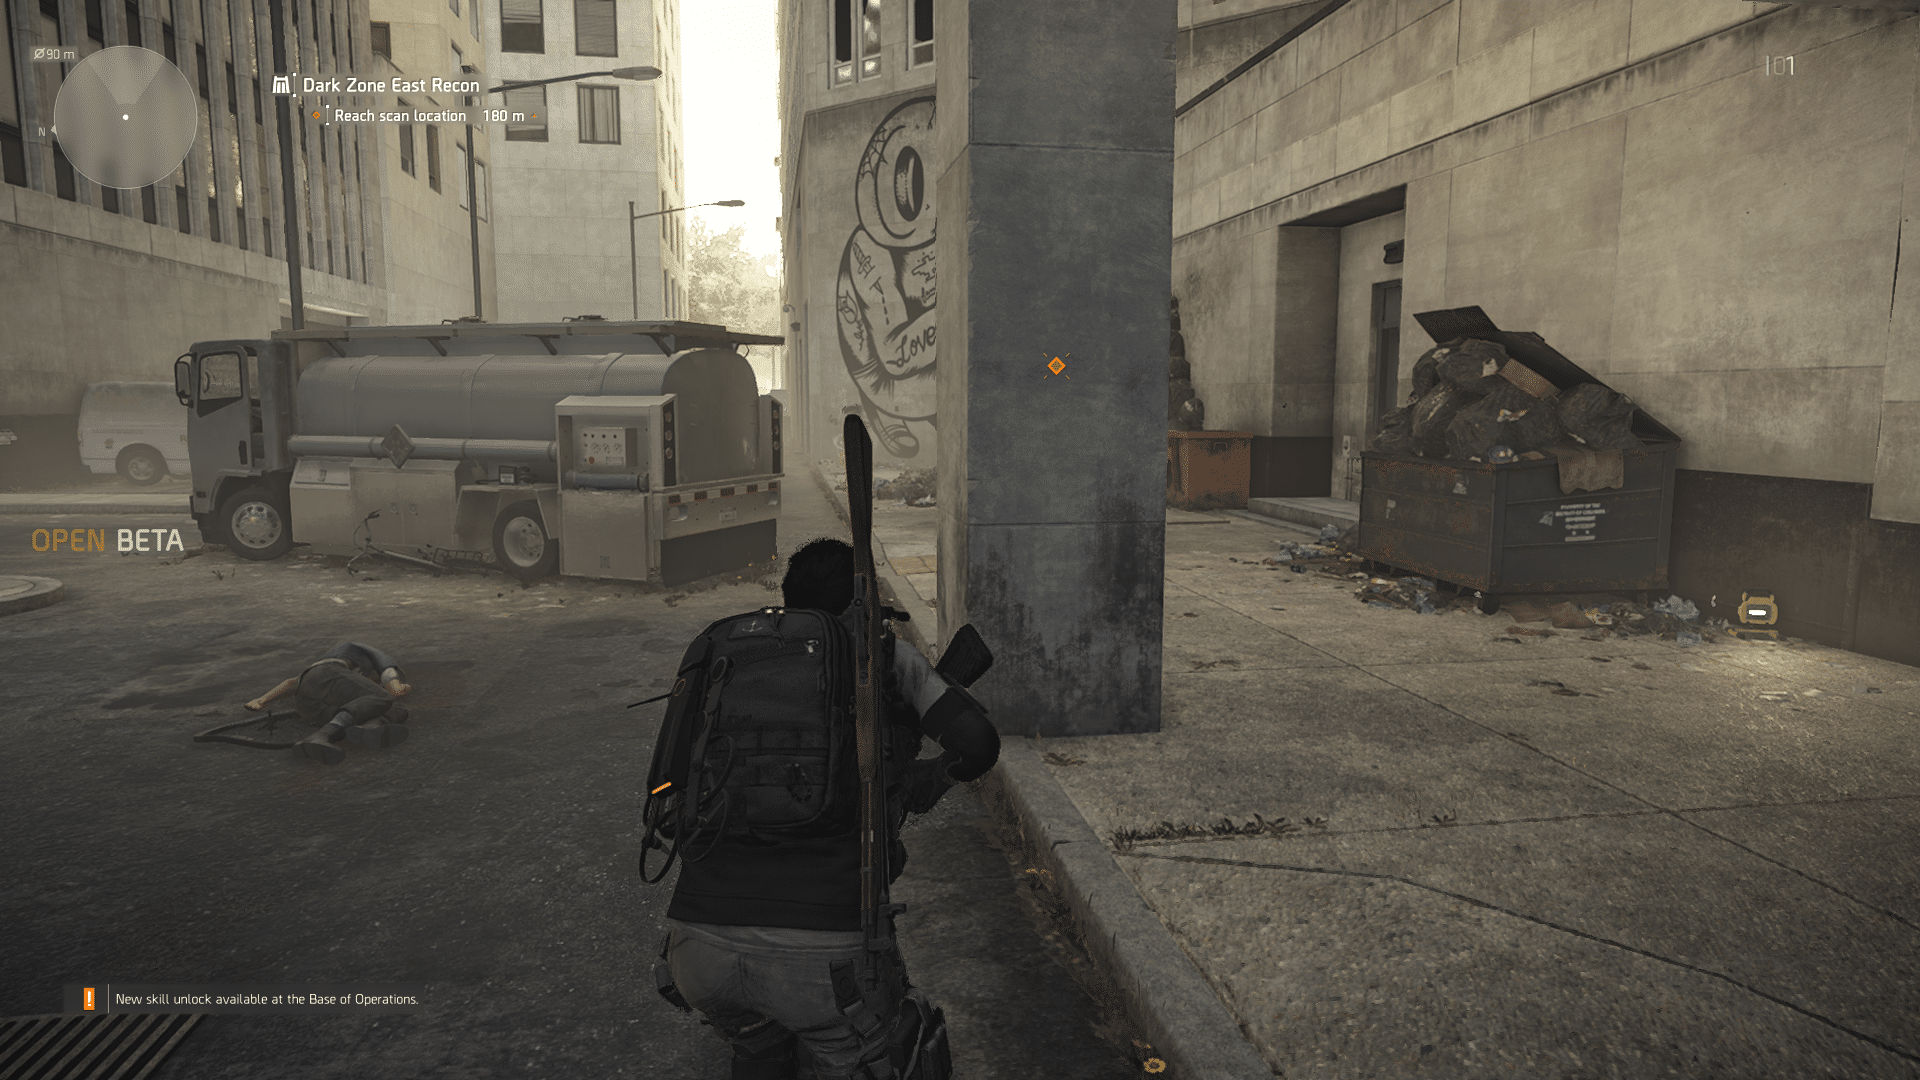 TheDivision2 3 4 2019 8 40 23 PM 301